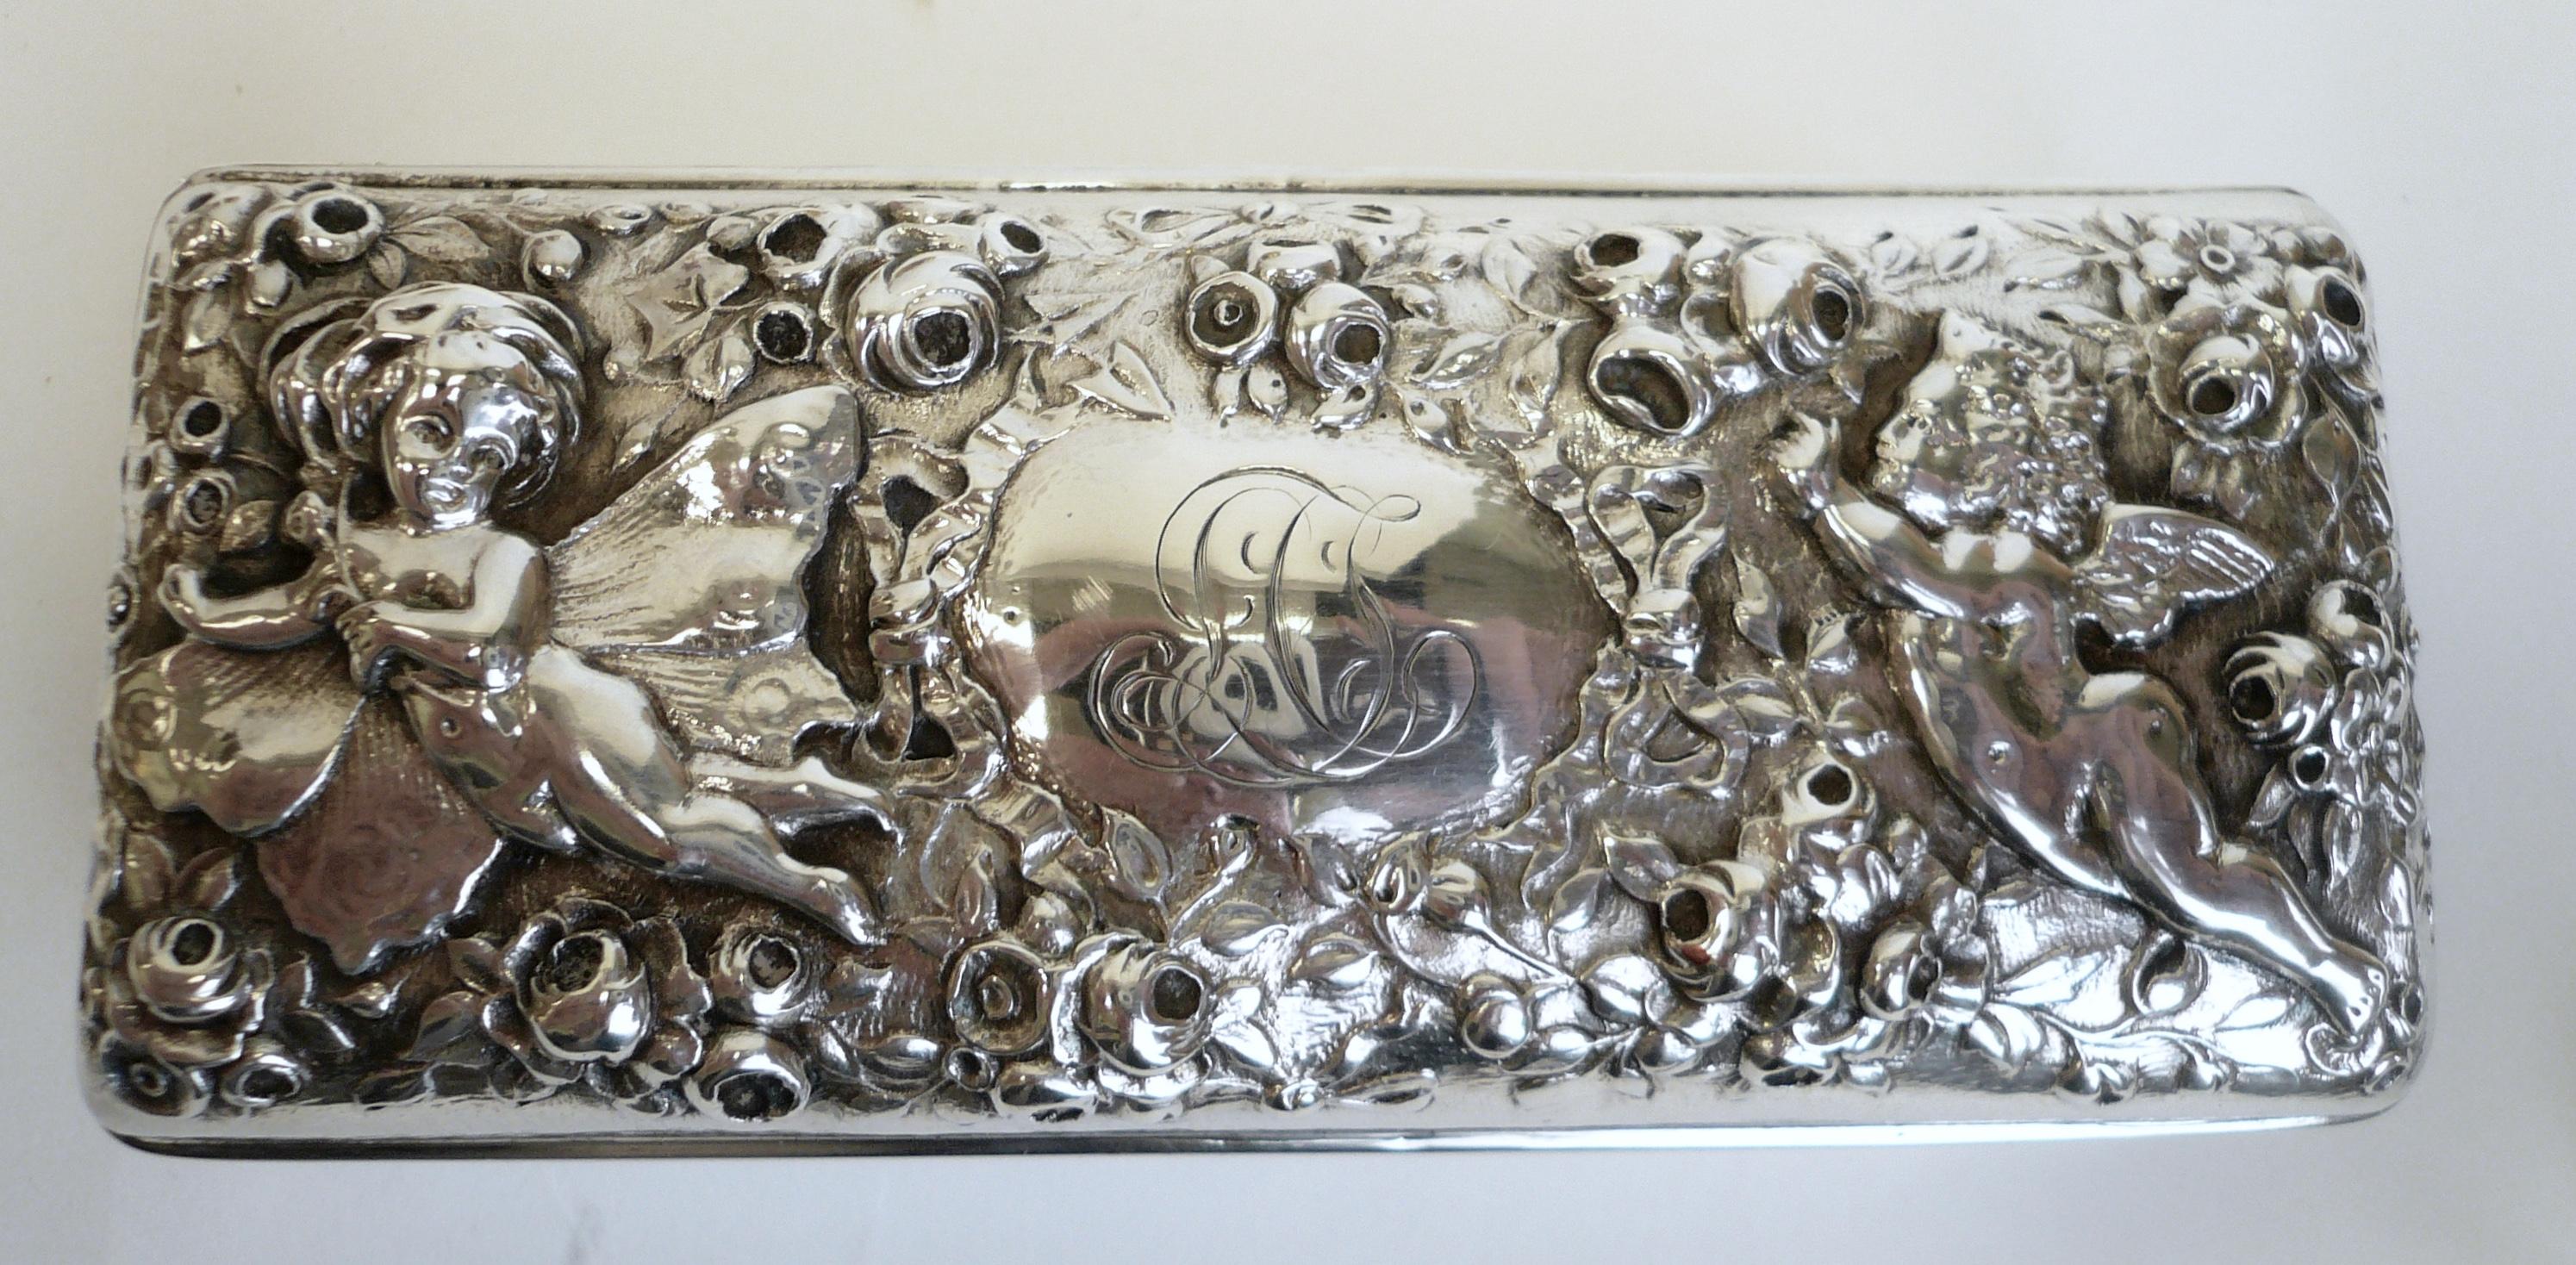 This sterling reposse box by Gorham features figures in a floral landscape.